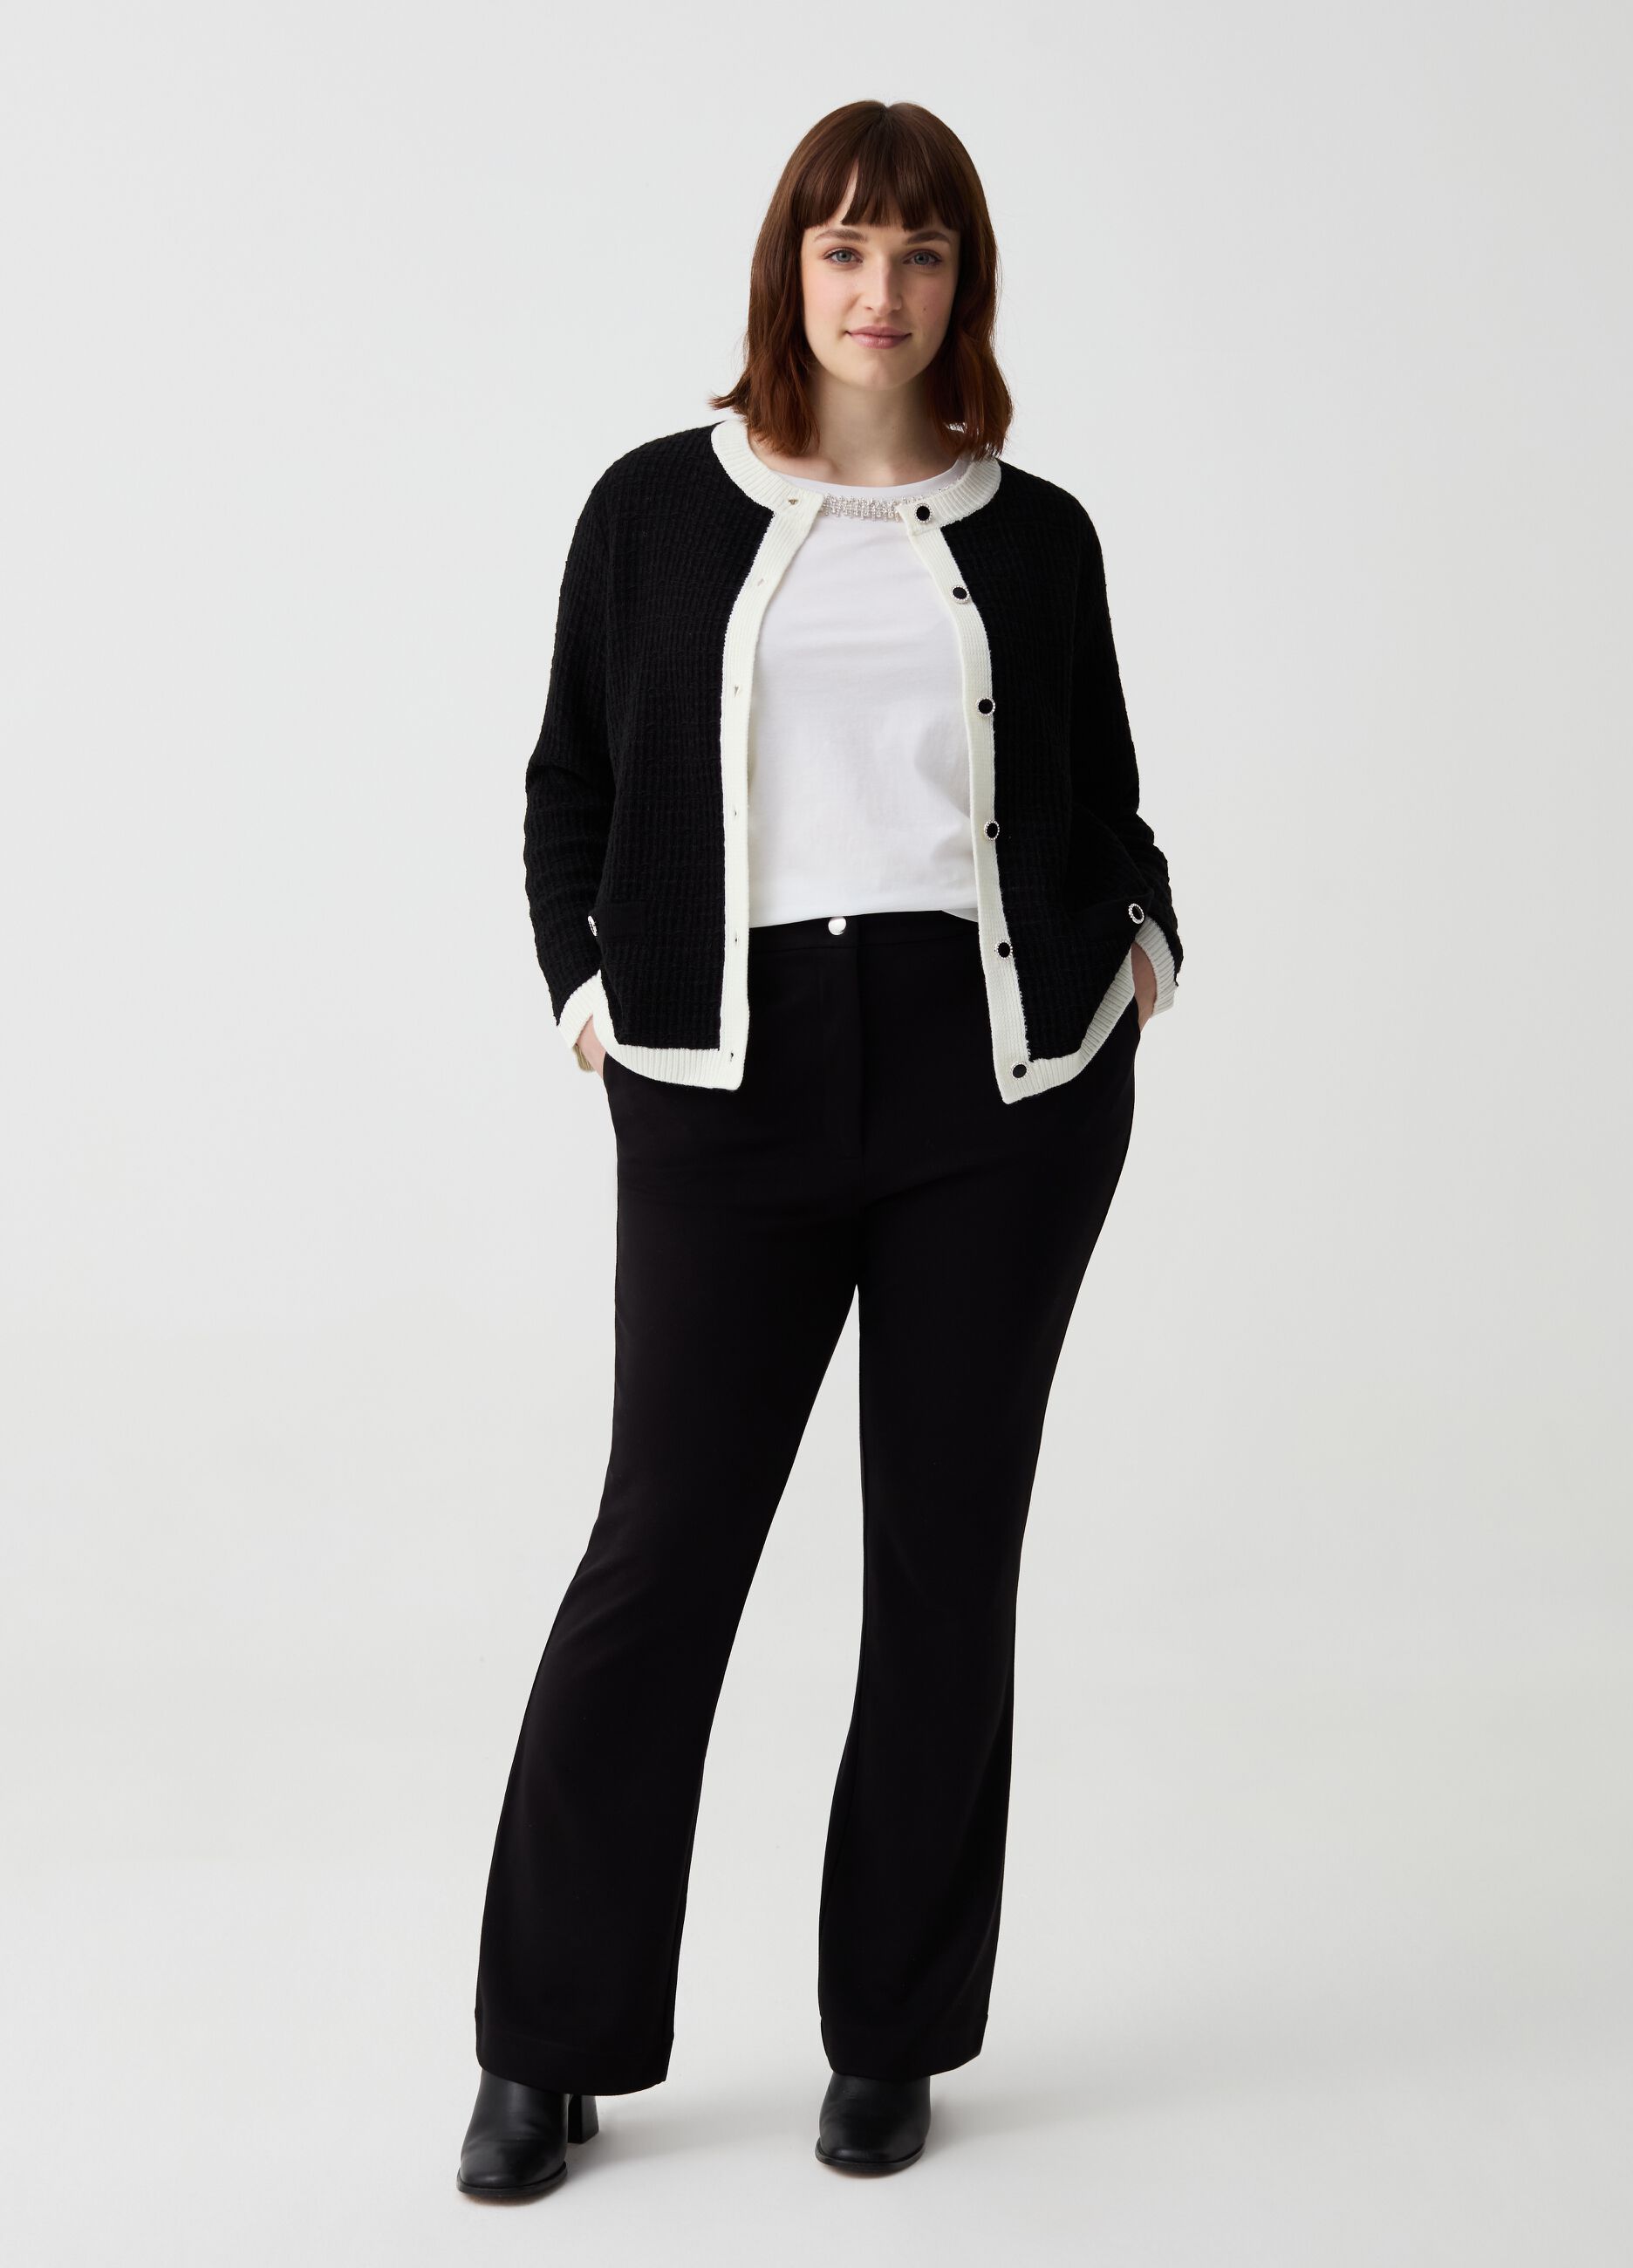 Curvy flare-fit stretch trousers